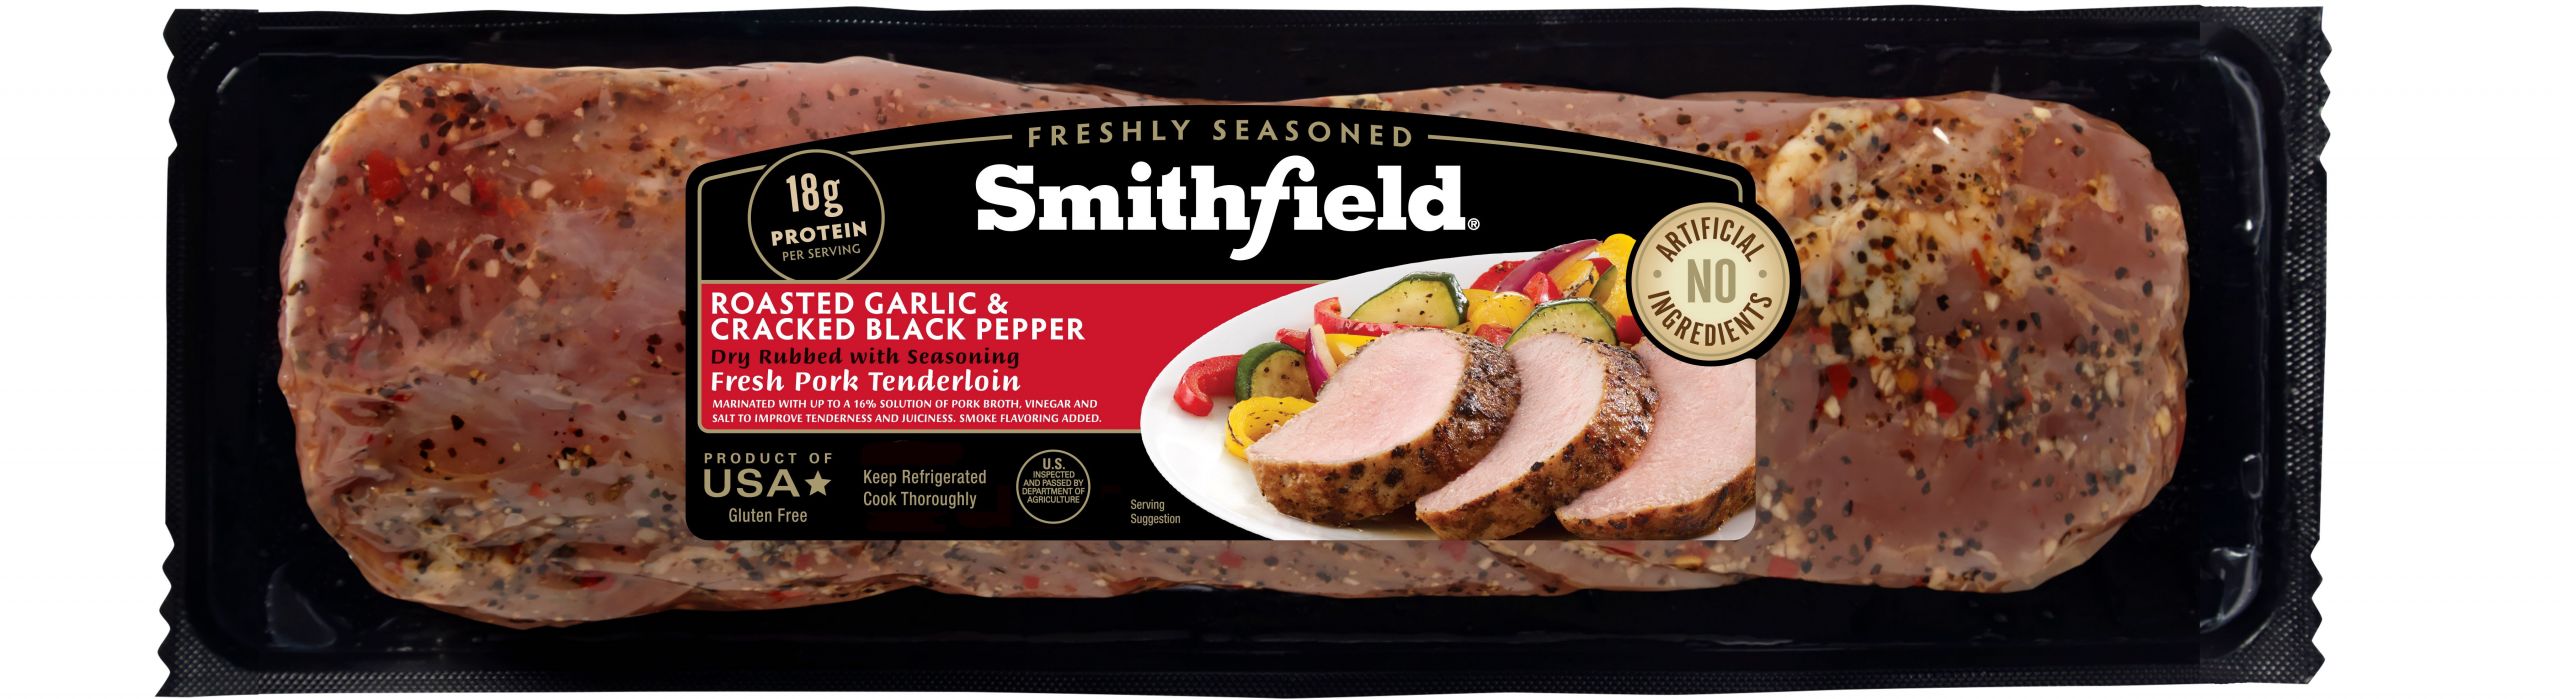 Our 15 Most Popular Smithfield Pork Loin
 Ever